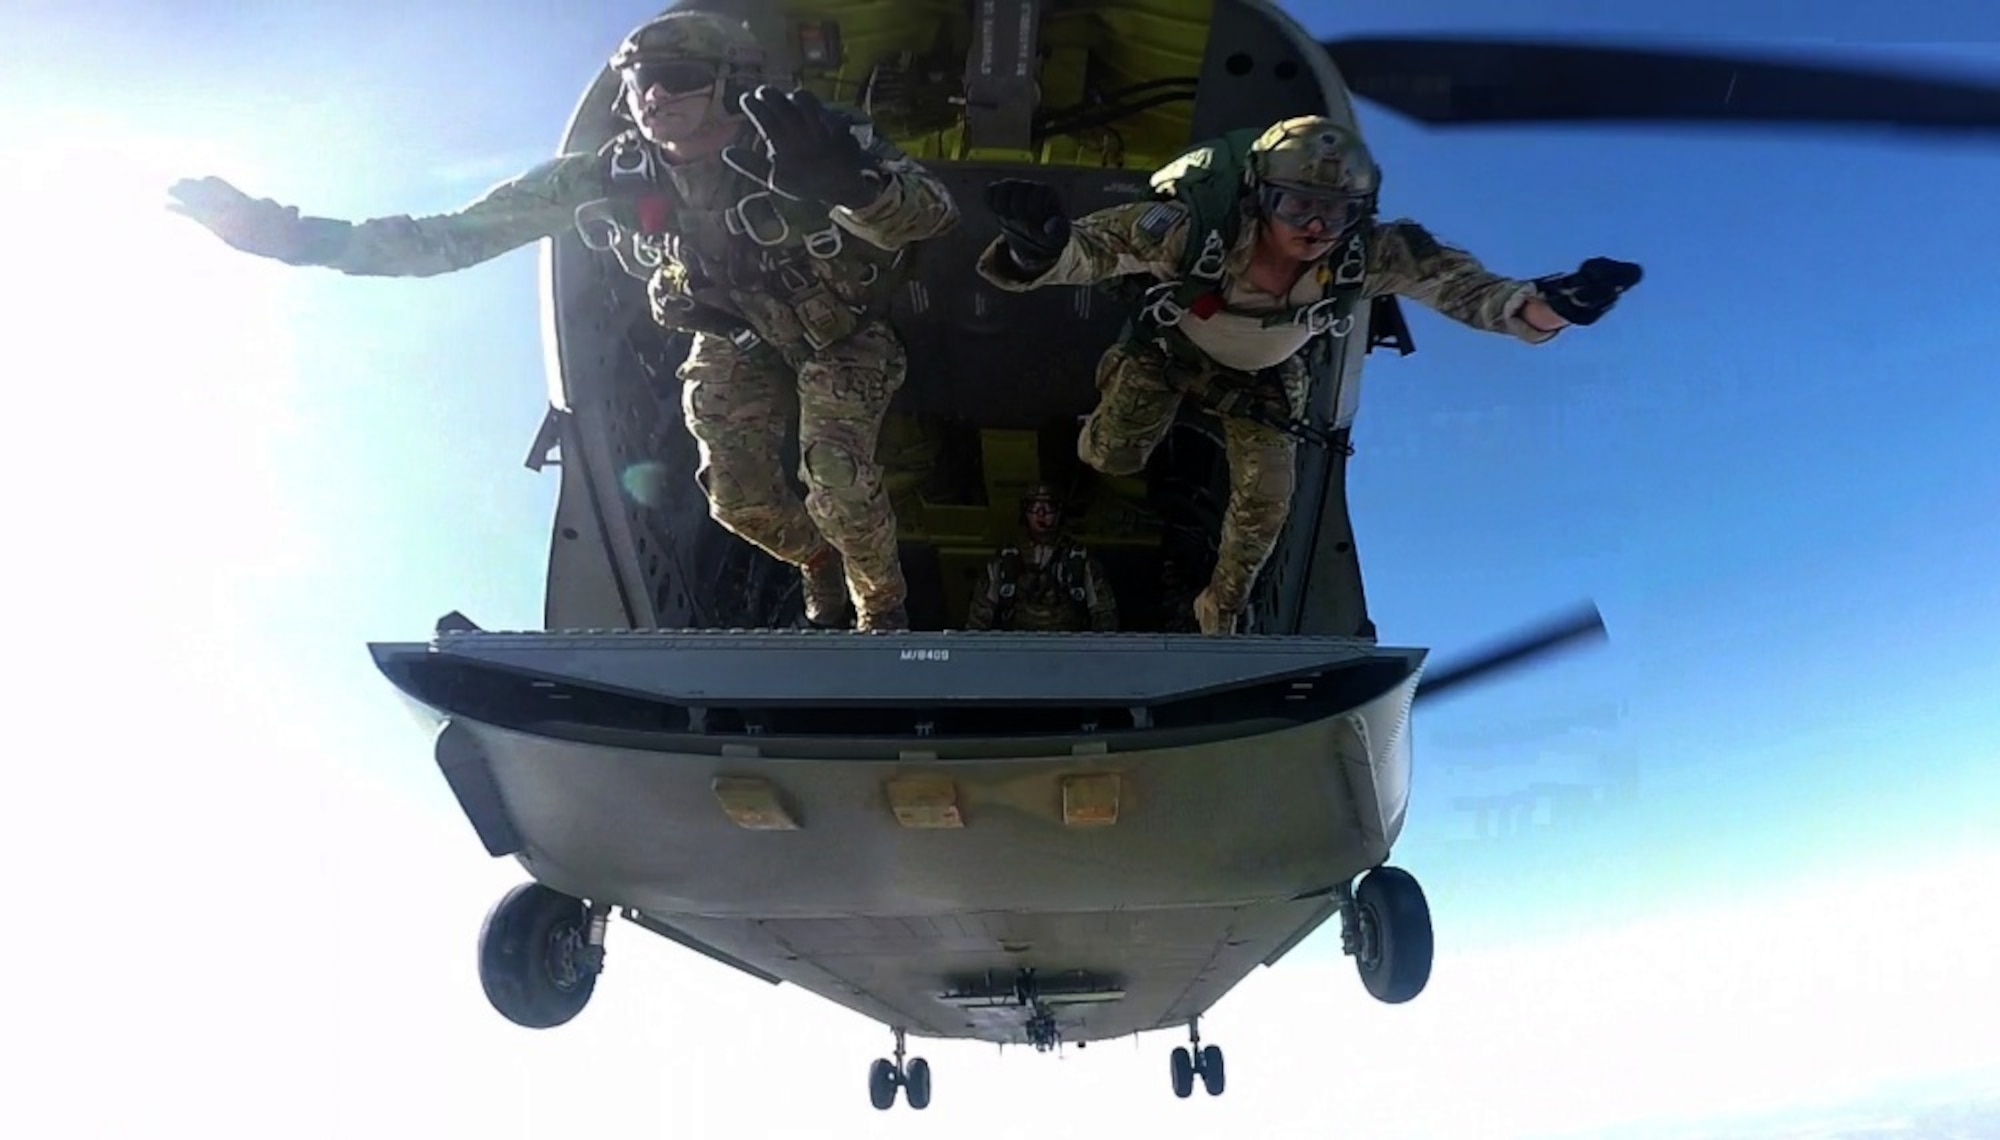 U.S. Air Force special tactics Airmen assigned to the 24th Special Operations Wing conduct a freefall jump from a U.S. Army CH-47 Chinook assigned to 5th Battalion, 159th Aviation Regiment, Fort Eustis, Va., during Exercise Emerald Warrior 16 over Eglin Range, Fla., May 7, 2016. Emerald Warrior is a U.S. Special Operation Command sponsored mission rehearsal exercise during which joint special operations forces train to respond to real and emerging worldwide threats. (U.S. Air Force still frame from video by Tech. Sgt. Gregory Brook) 
